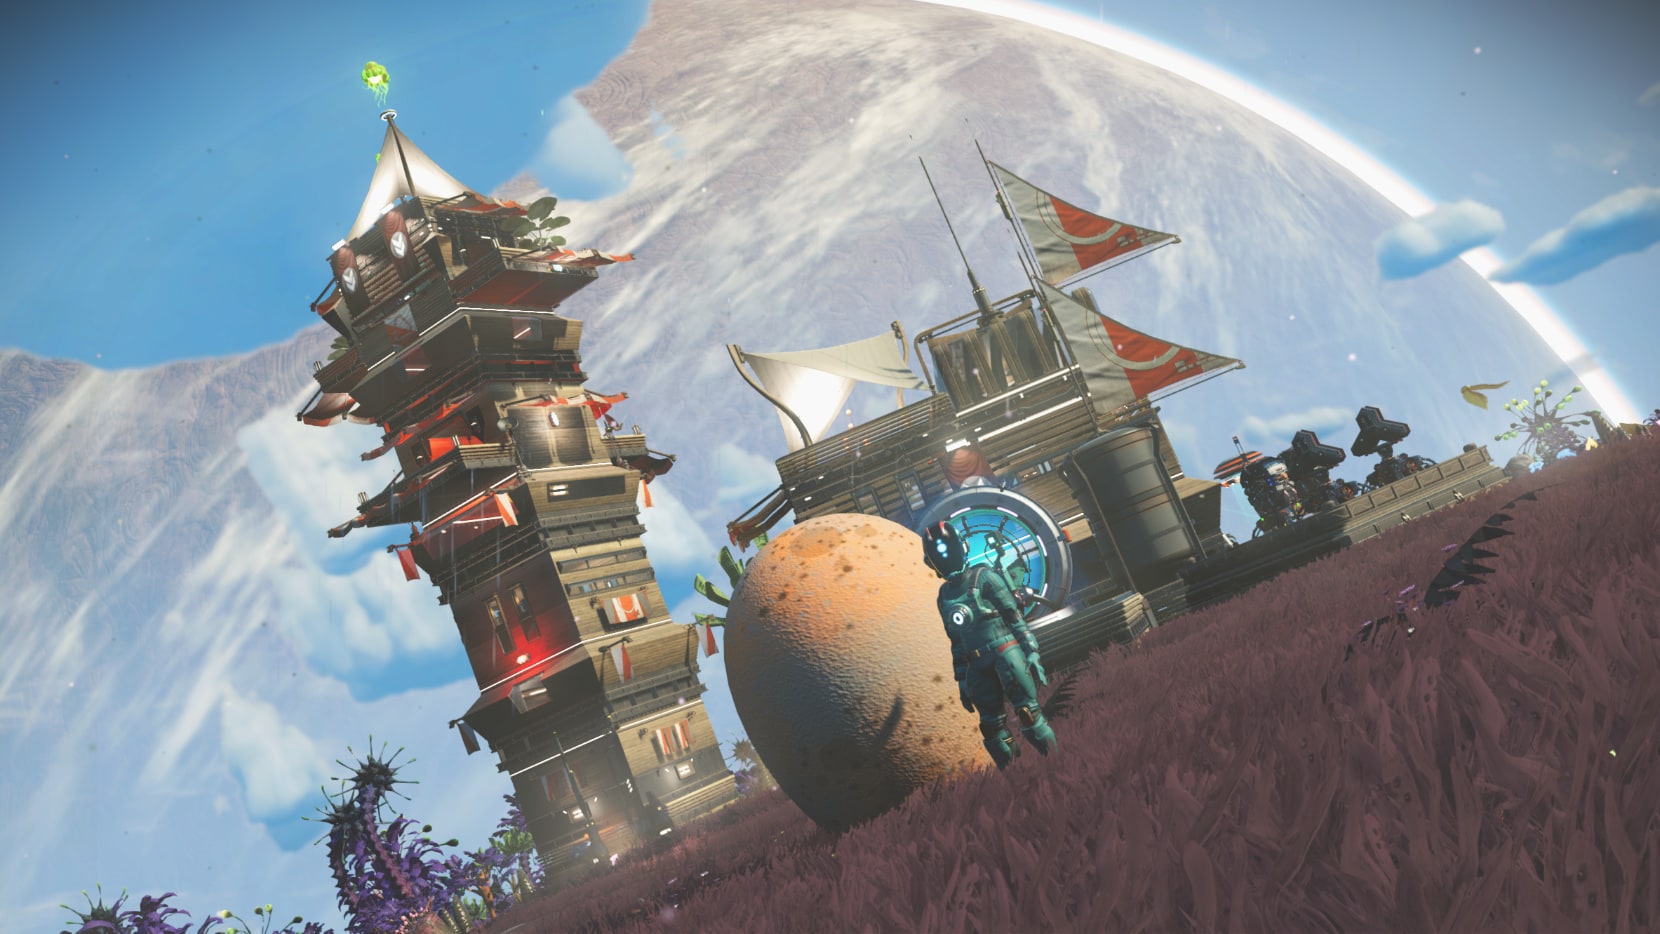 Tower base with massive companion egg in yard, planet behind